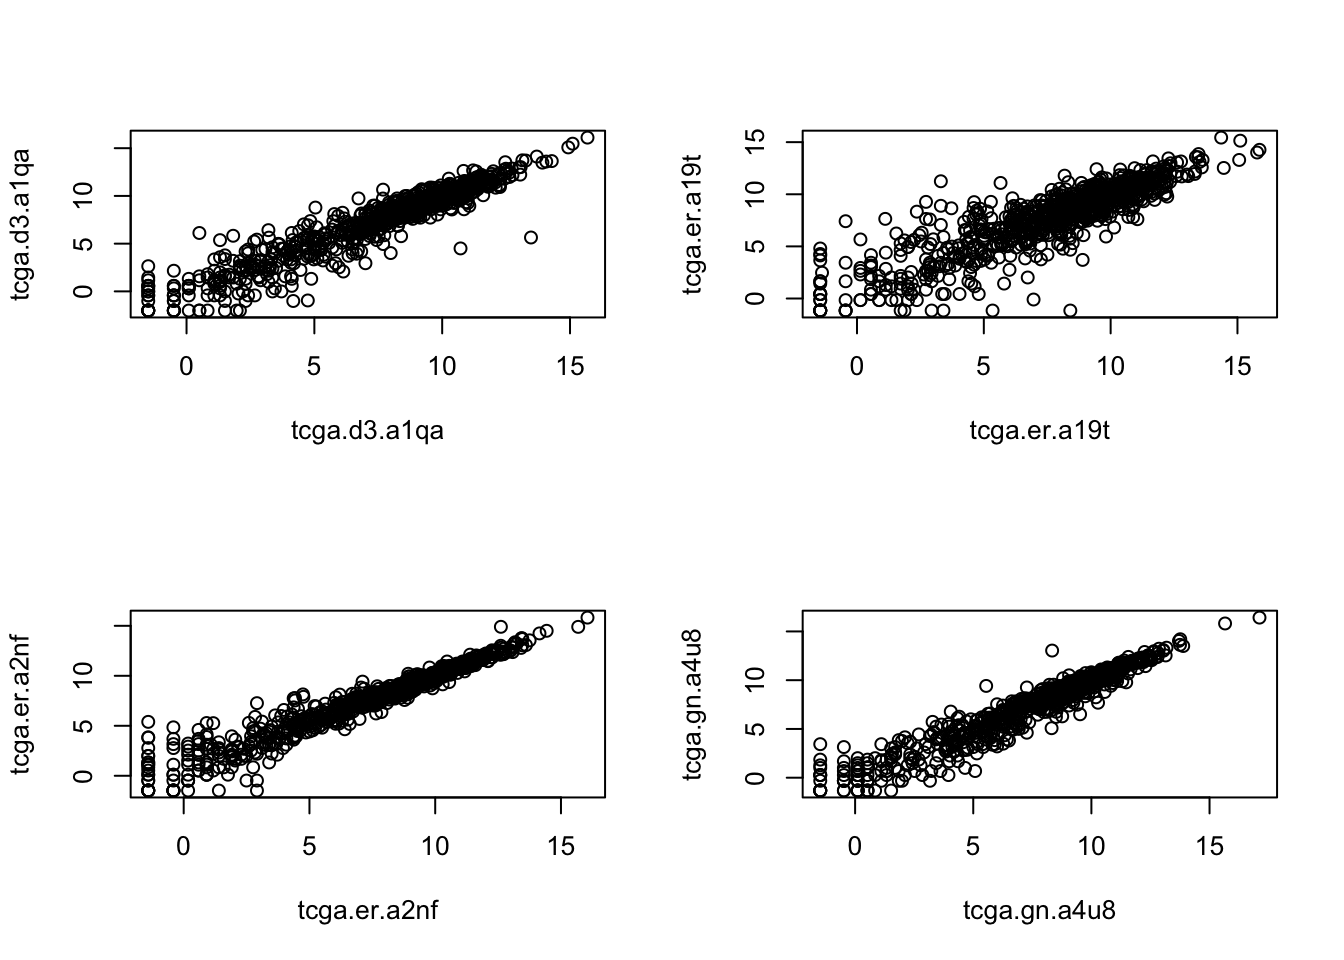 \label{fig:figure1}figure1:The duplicate samples are plotted together to assess the correlation. They look similar and it is not obvious which duplicate to keep.